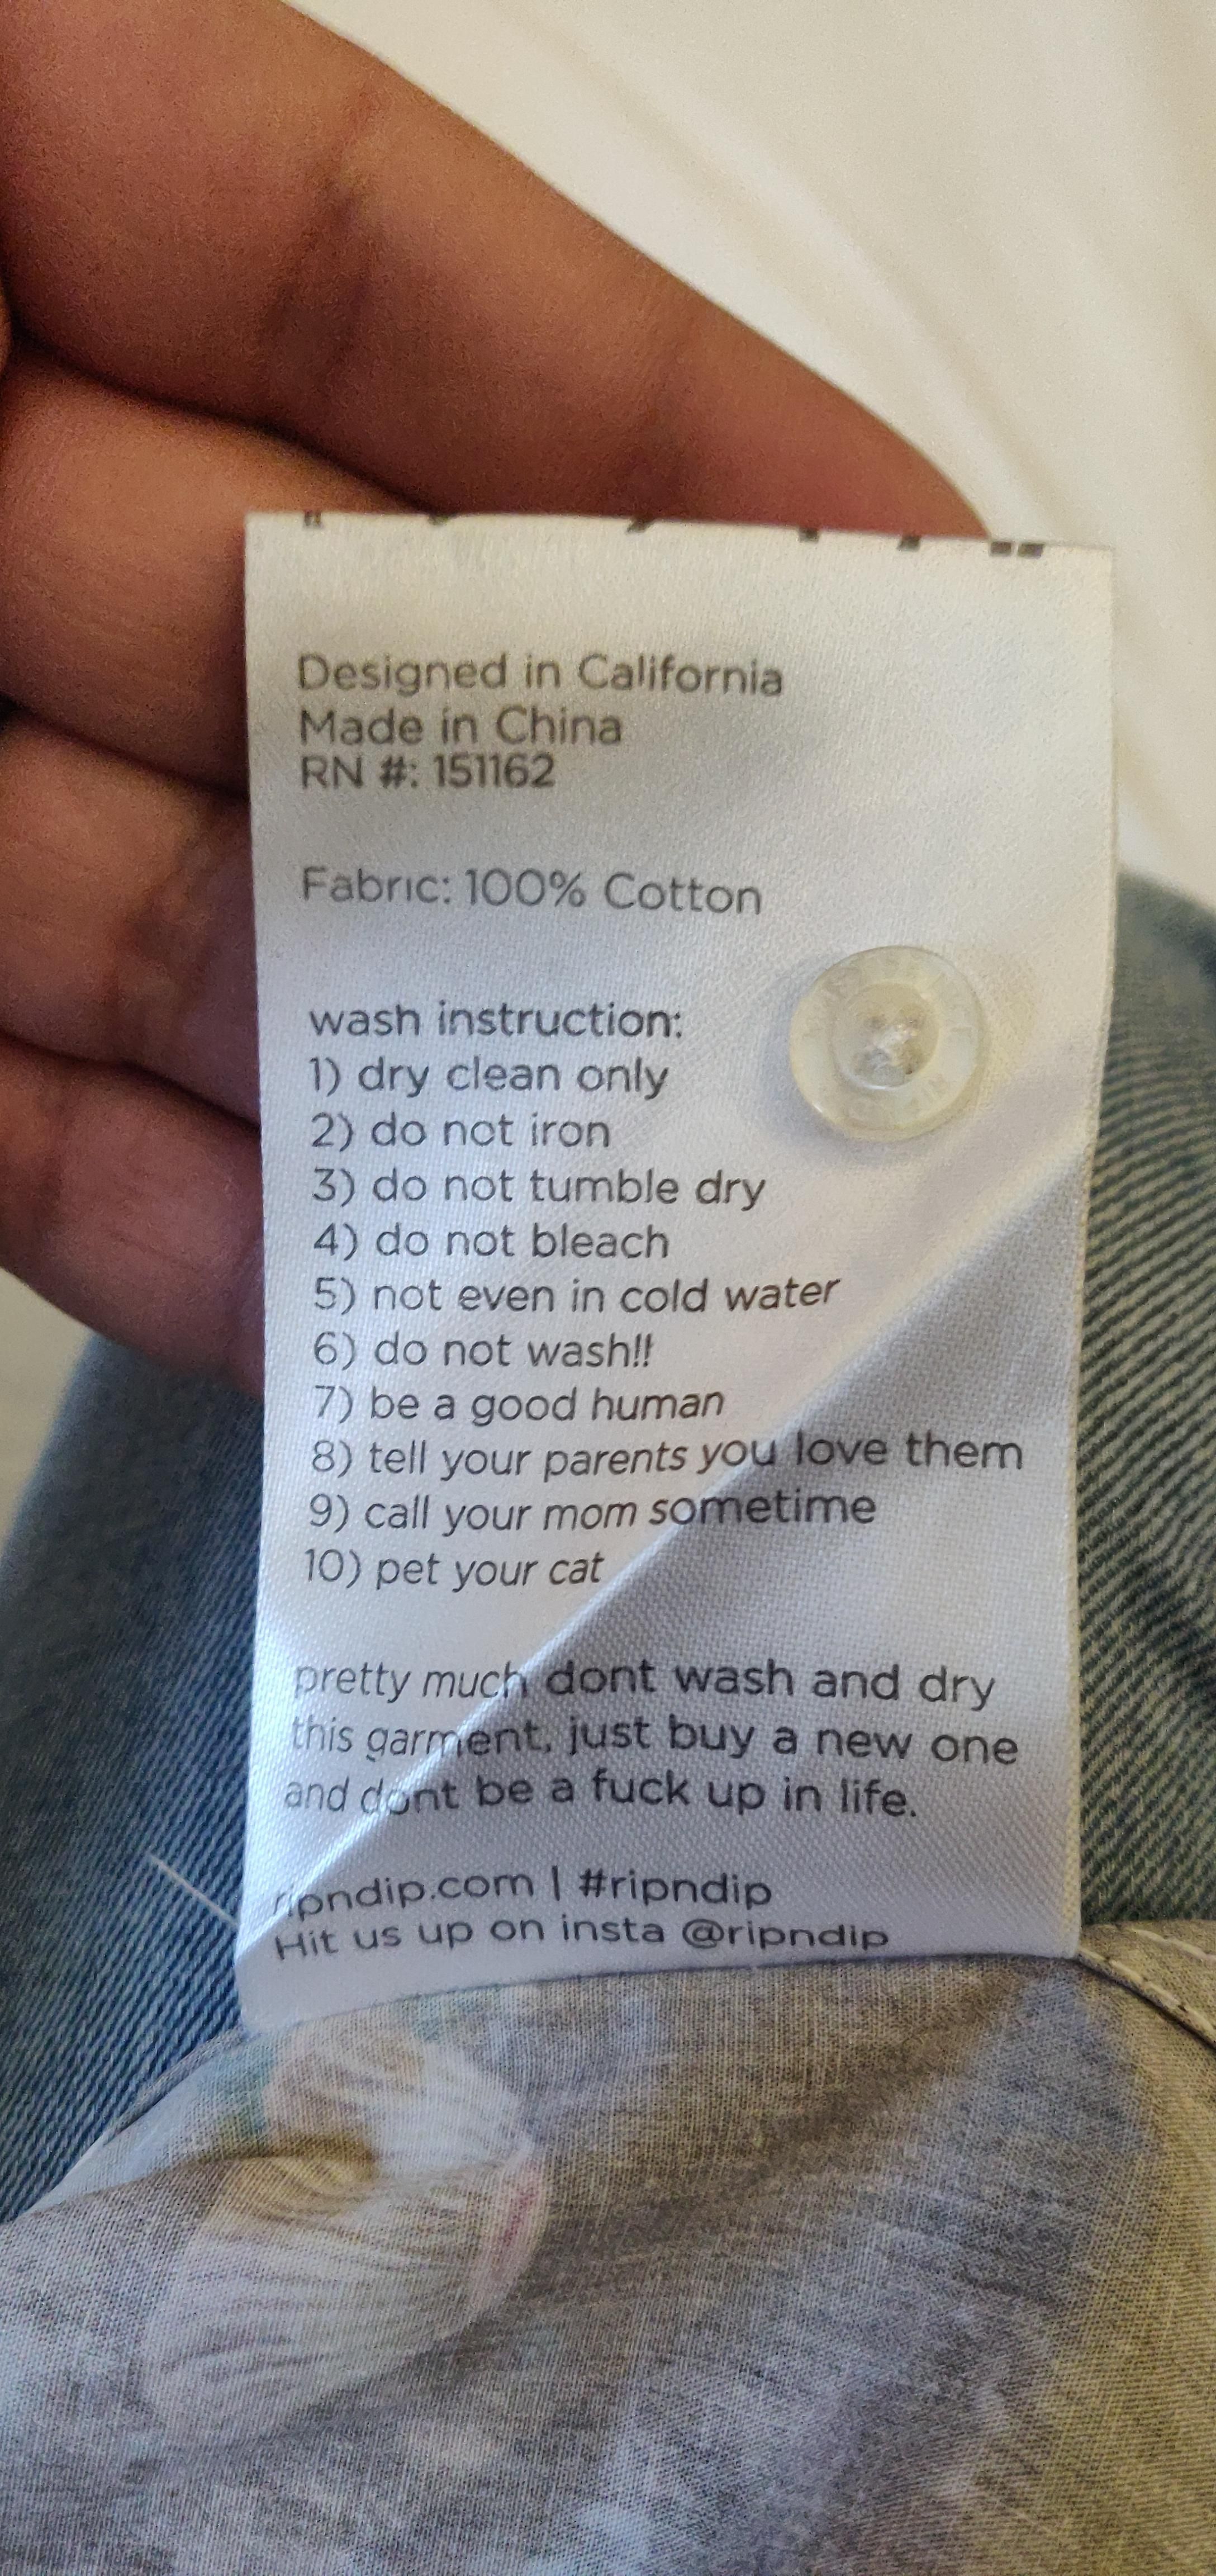 These washing instructions gave me a good laugh.